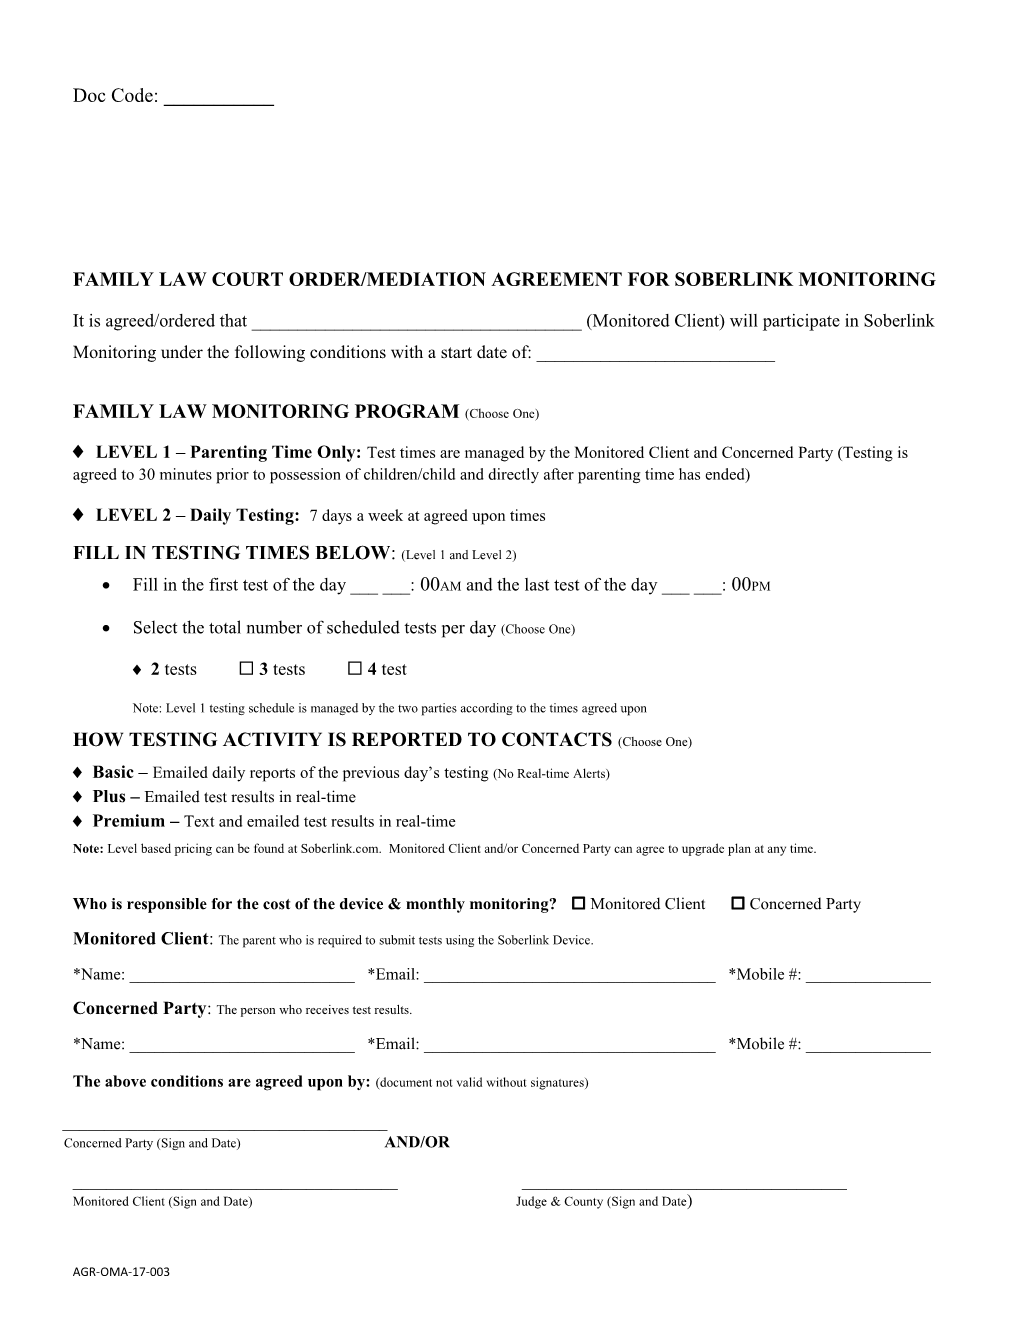 Family Law Court Order/Mediation Agreement for Soberlink Monitoring